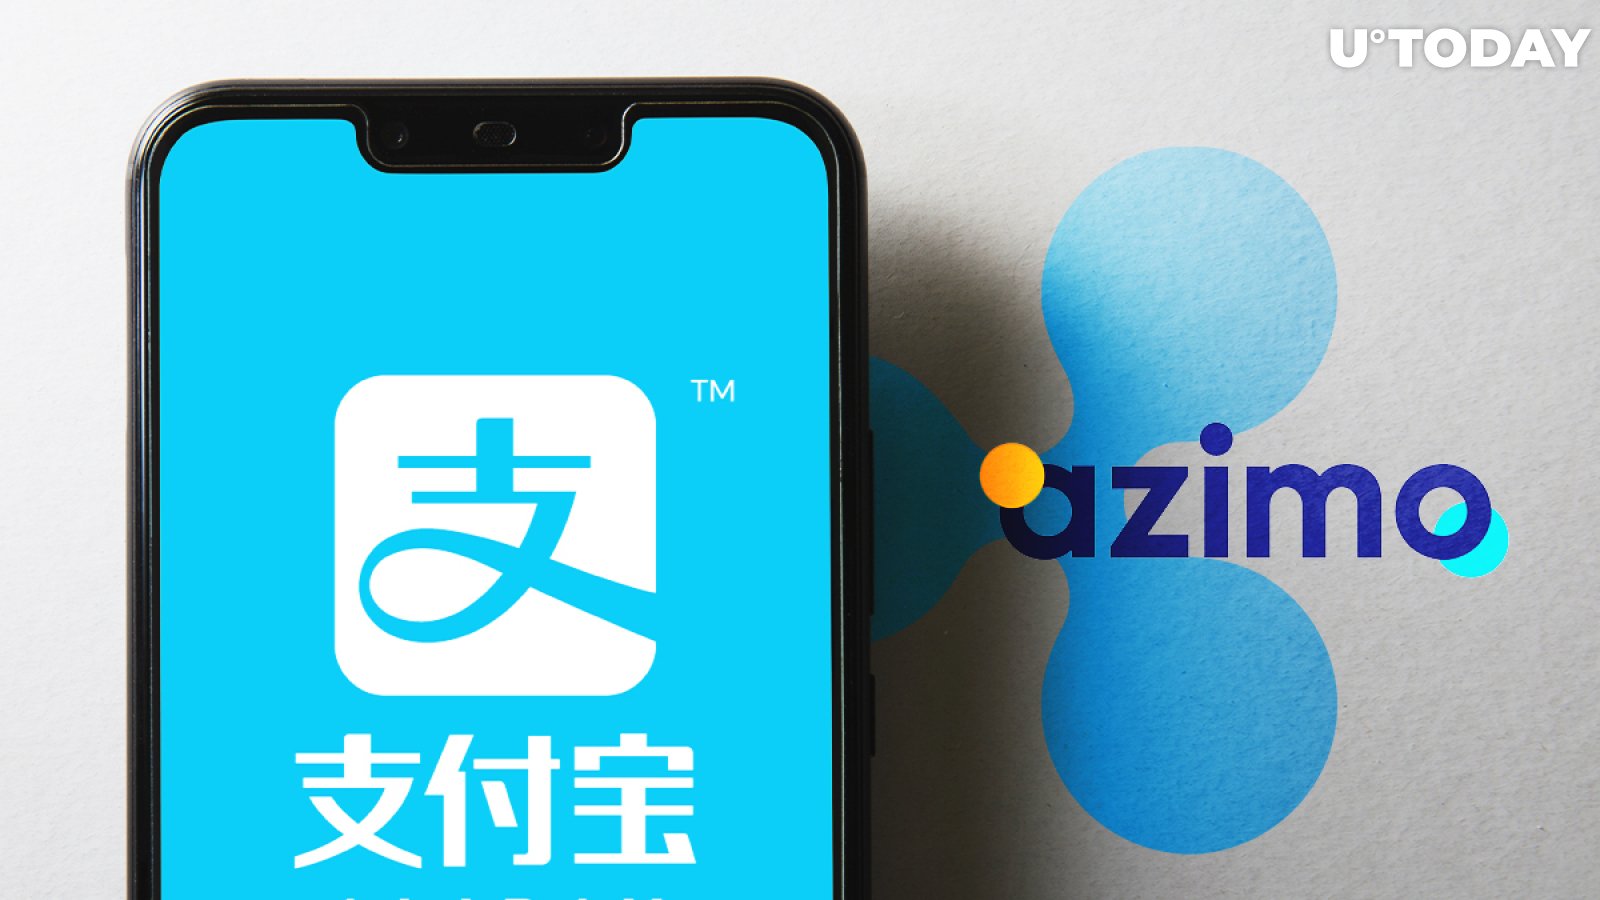 Ripple's Partner Azimo Teams Up with Alipay for Wiring Funds to China in RMB